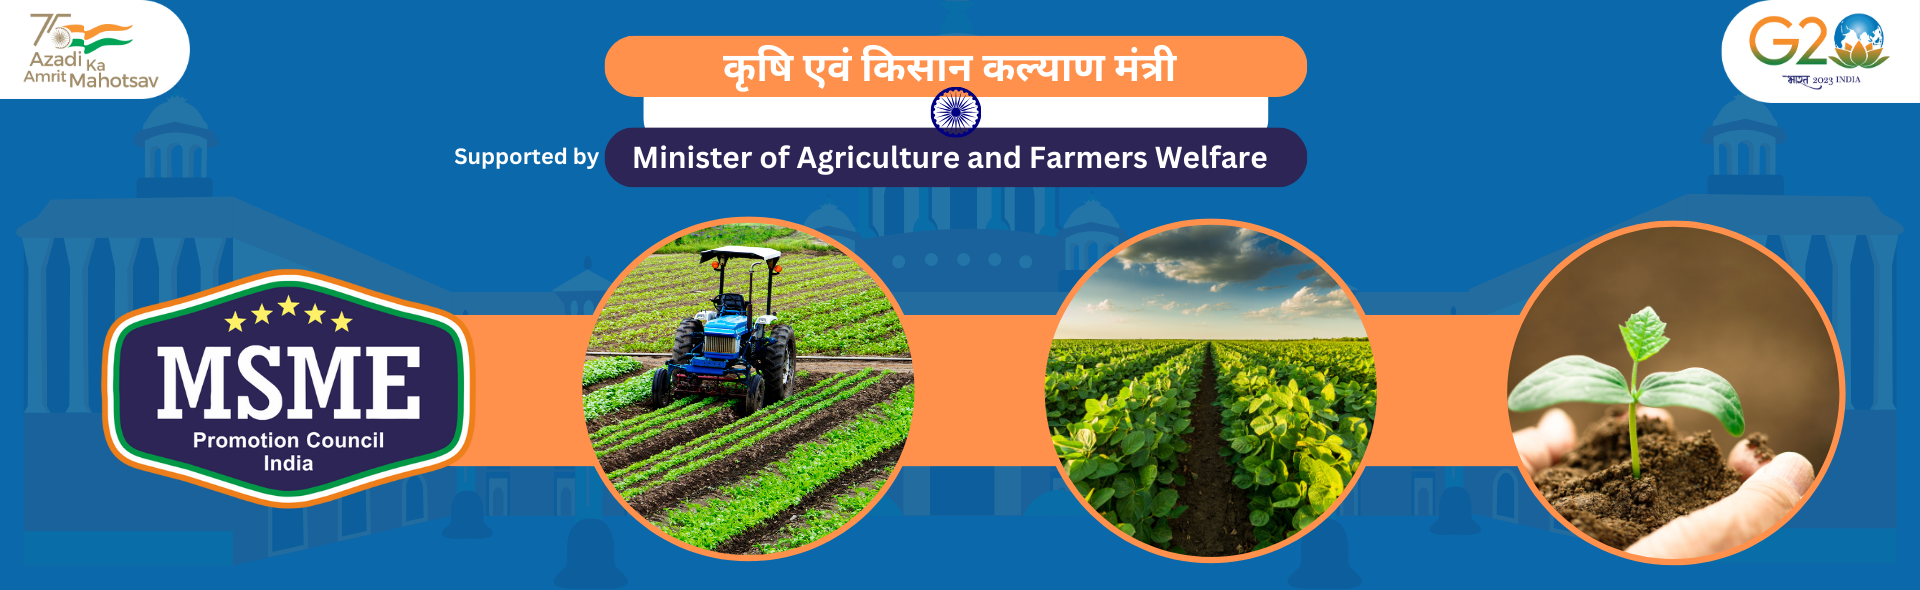 Minister of Agriculture and Farmers Welfare